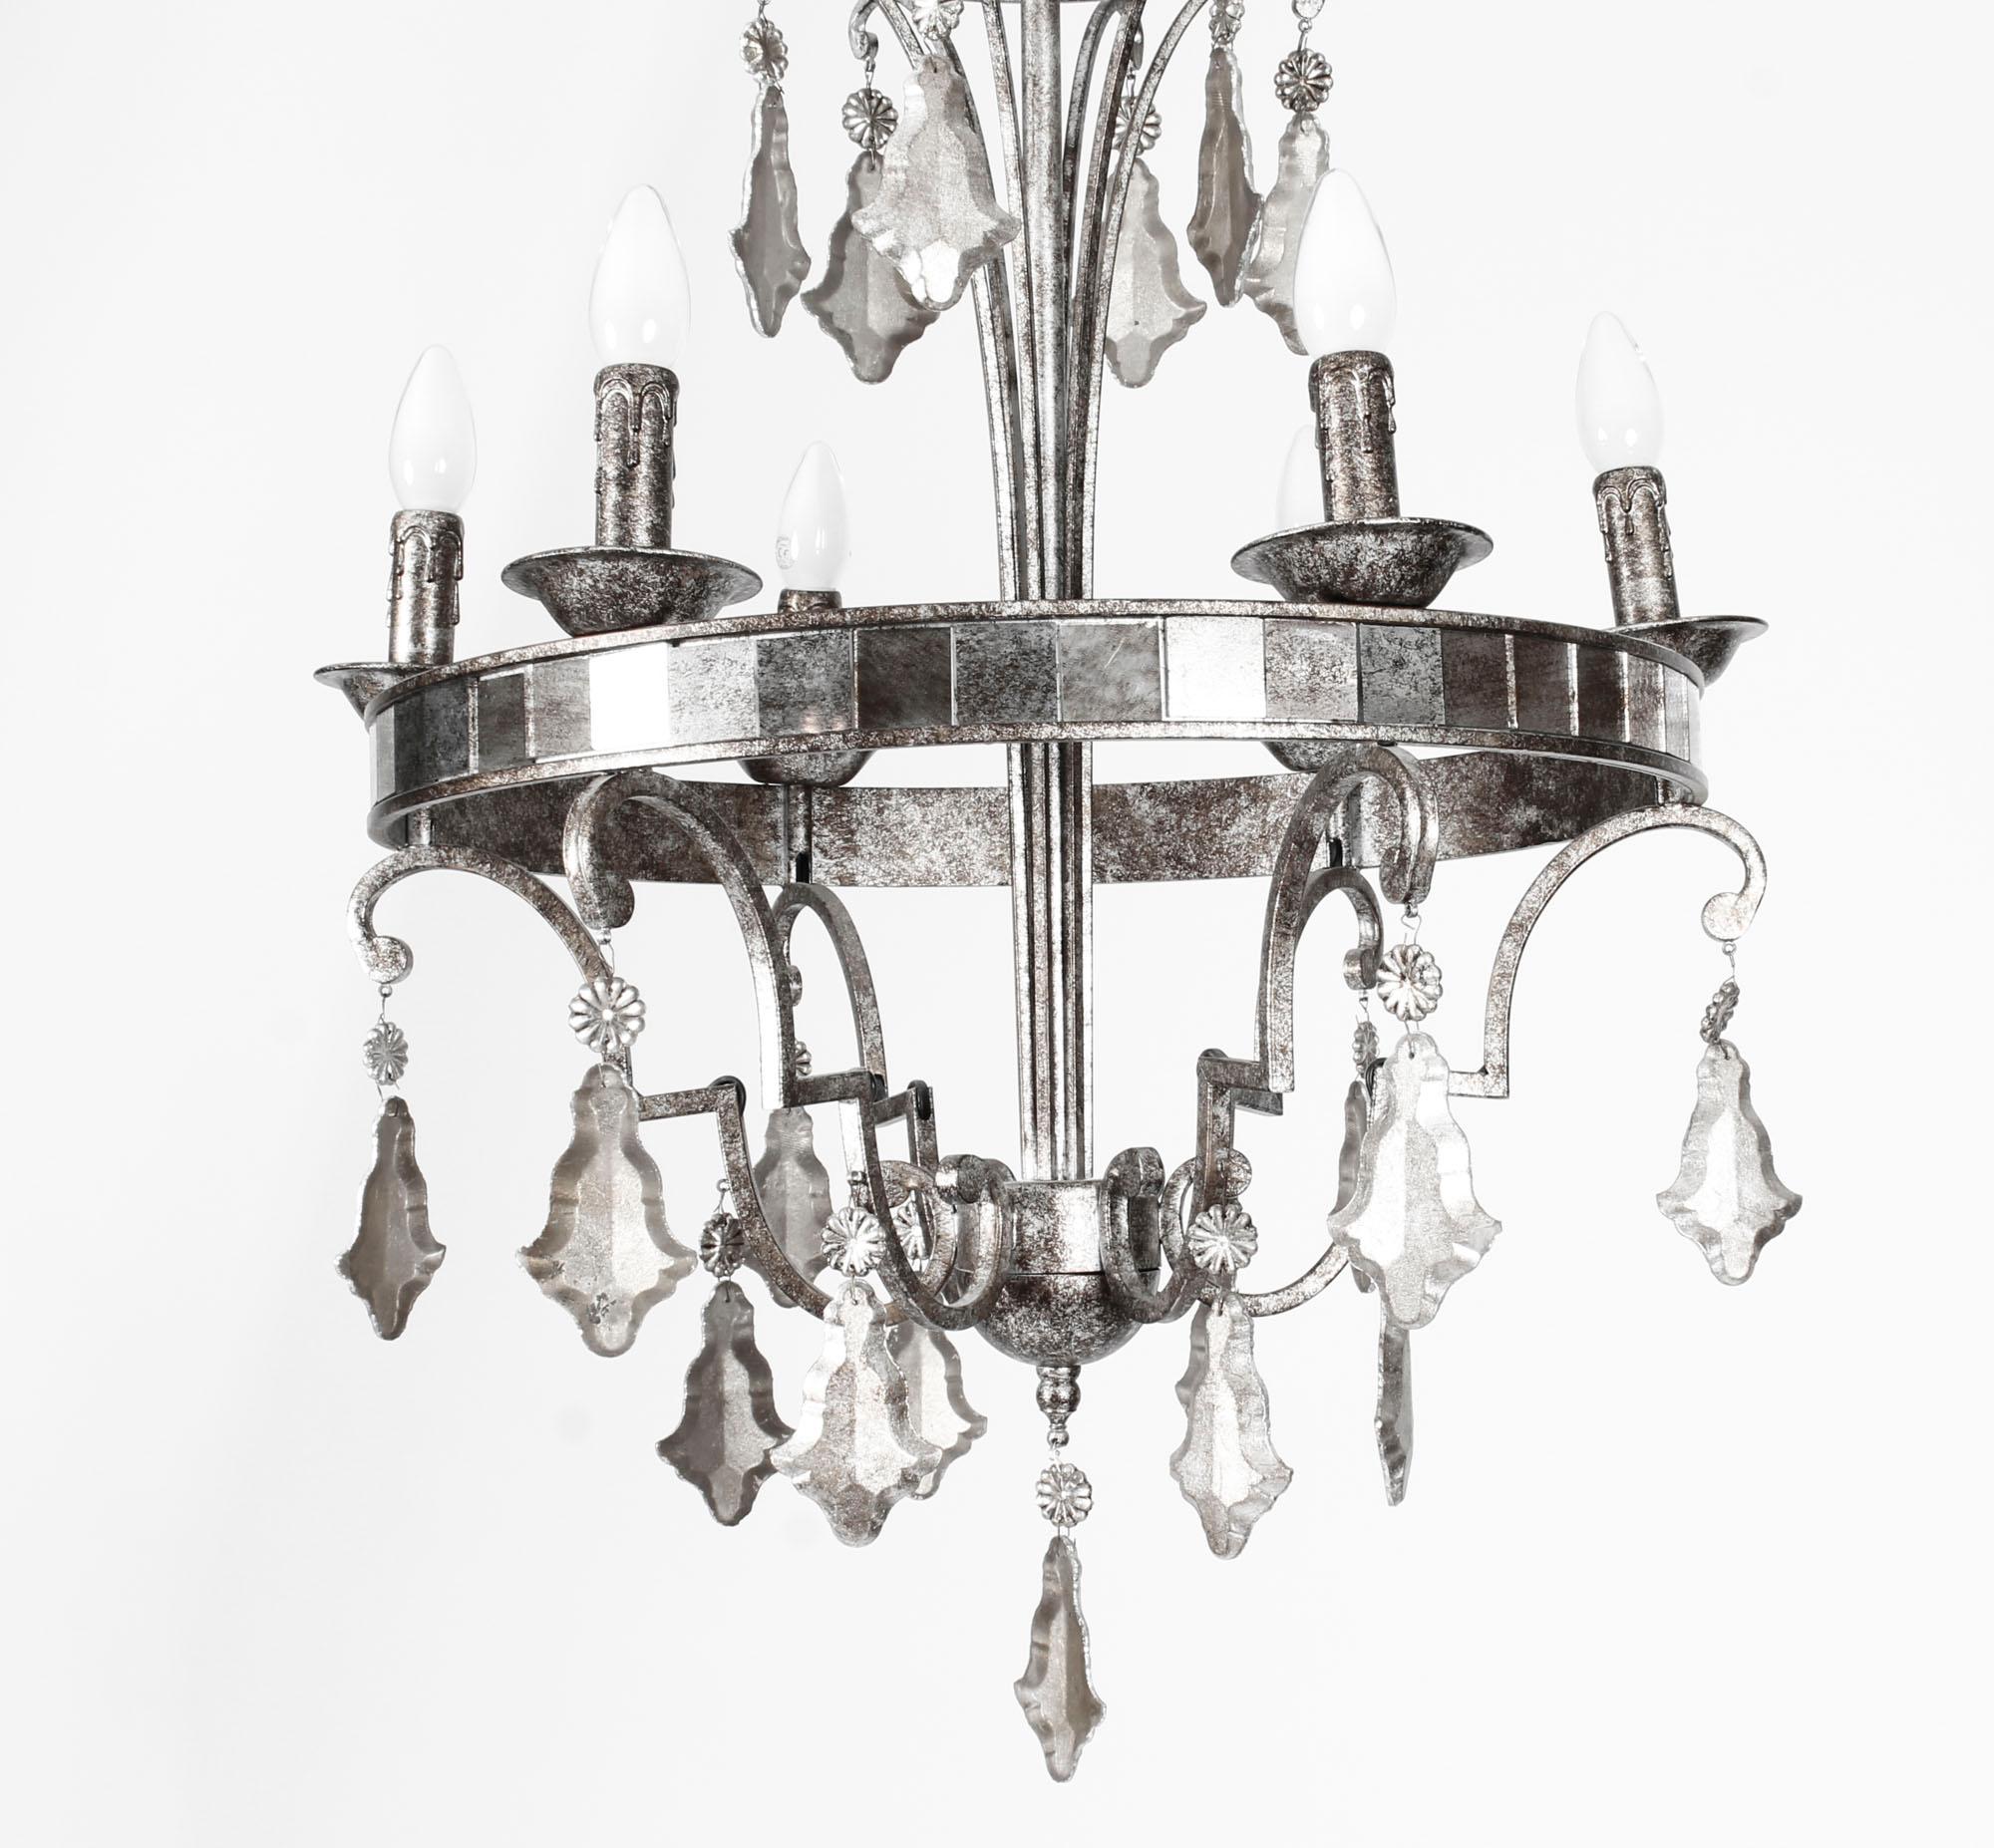 This is a highly decorative six-light cage chandelier, late 20th century in date.

The silvered bronze frame supports six candle lights and is decorated with mirrored glass and silvered faceted cut glass drops.

Add an elegant touch to any room